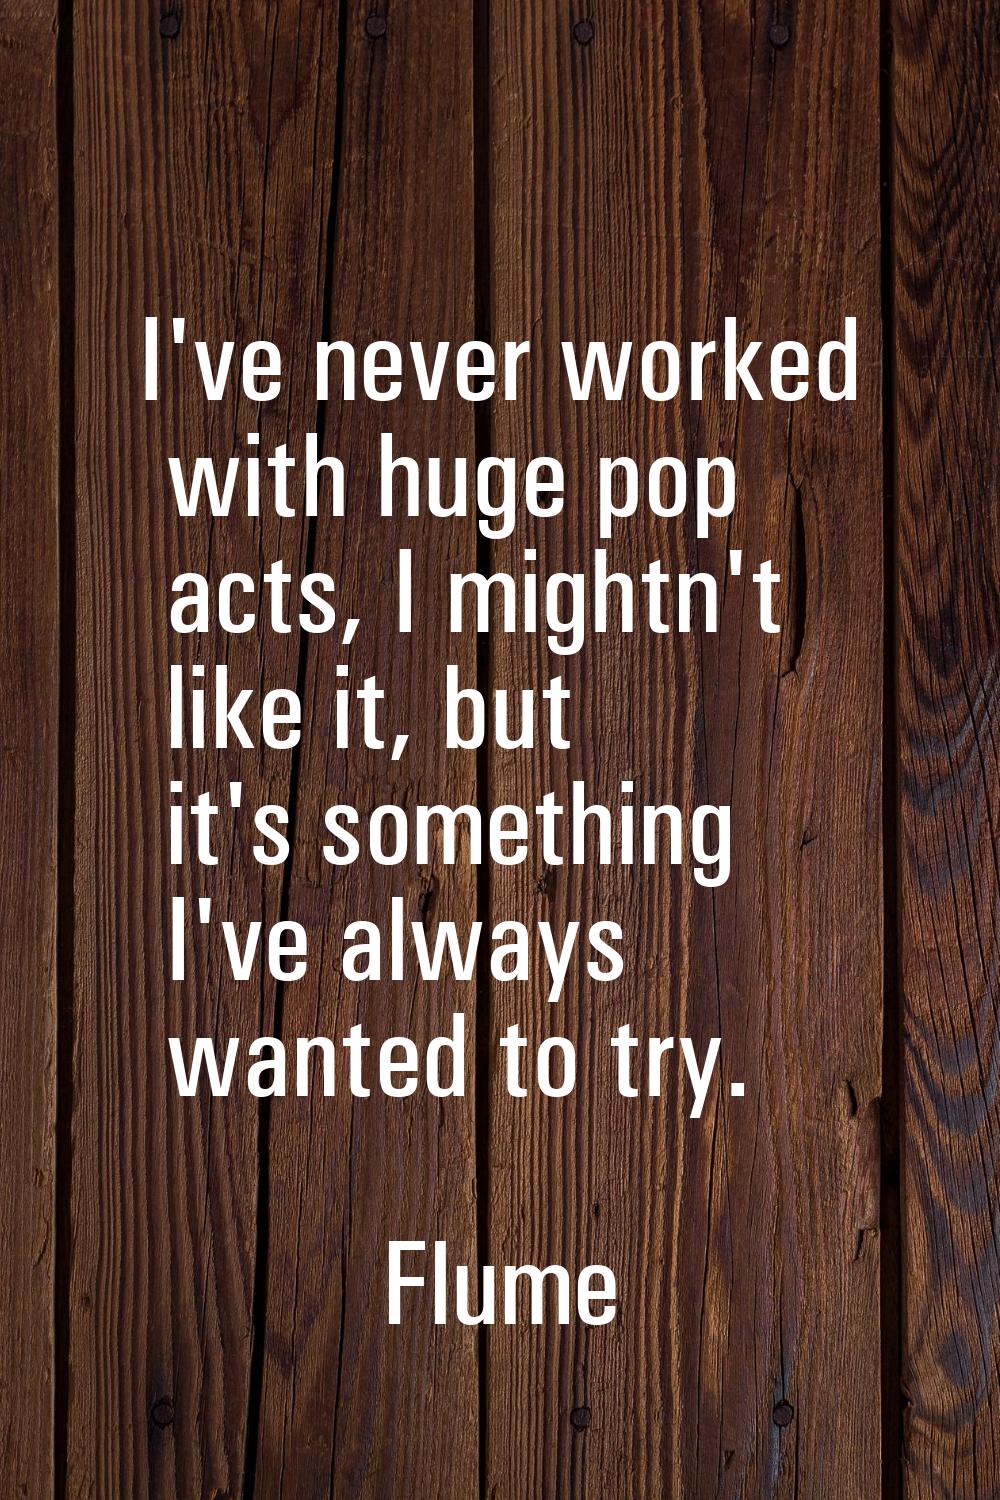 I've never worked with huge pop acts, I mightn't like it, but it's something I've always wanted to 